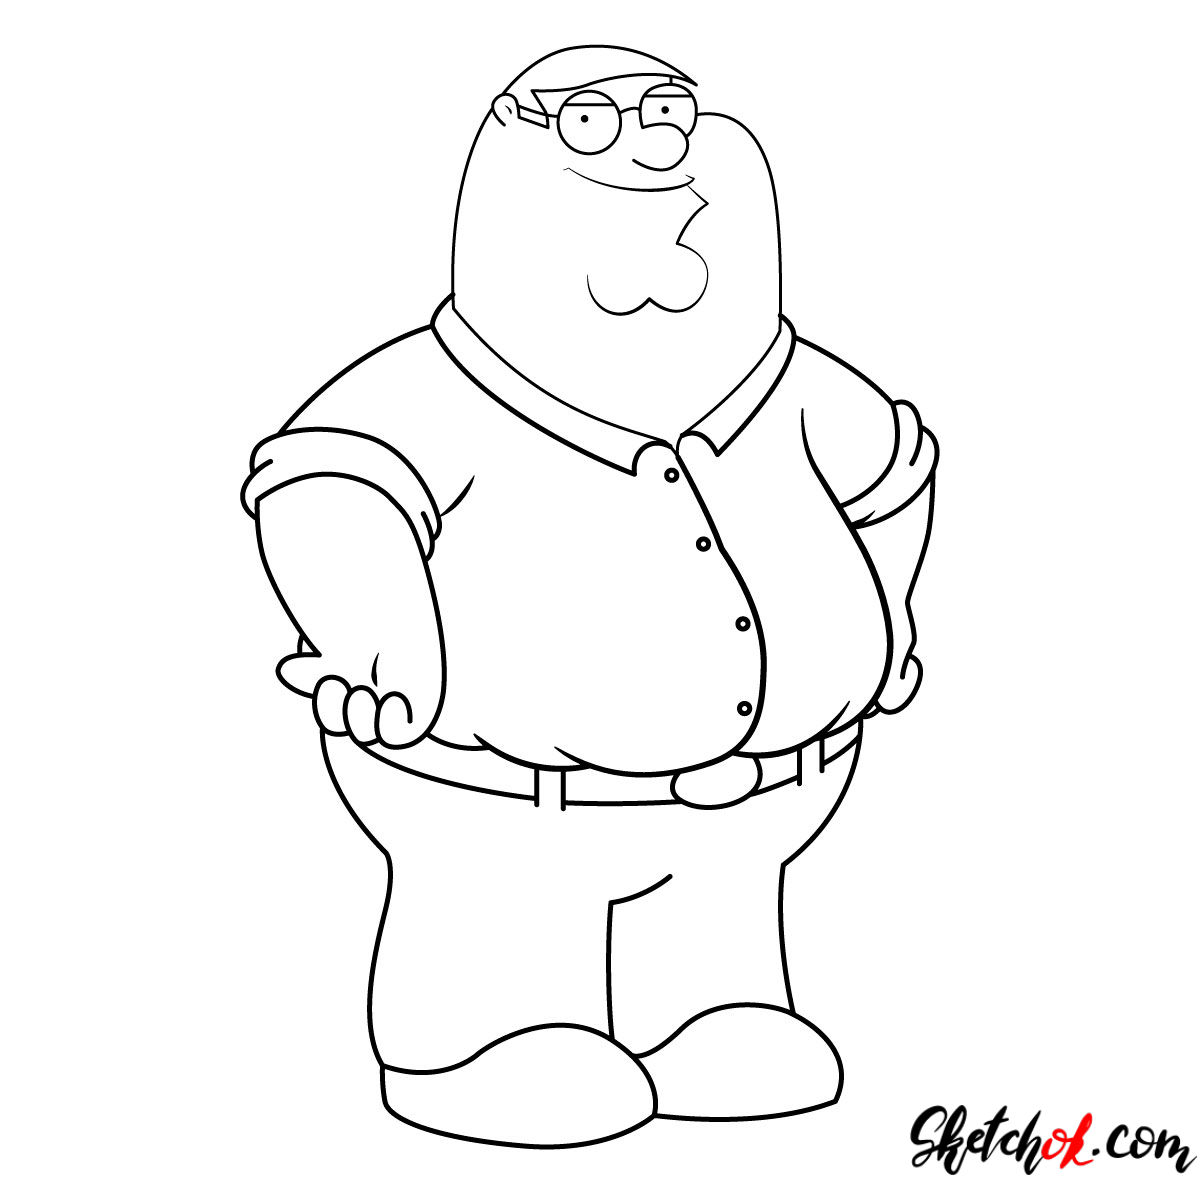 How to draw Peter Griffin Sketchok easy drawing guides